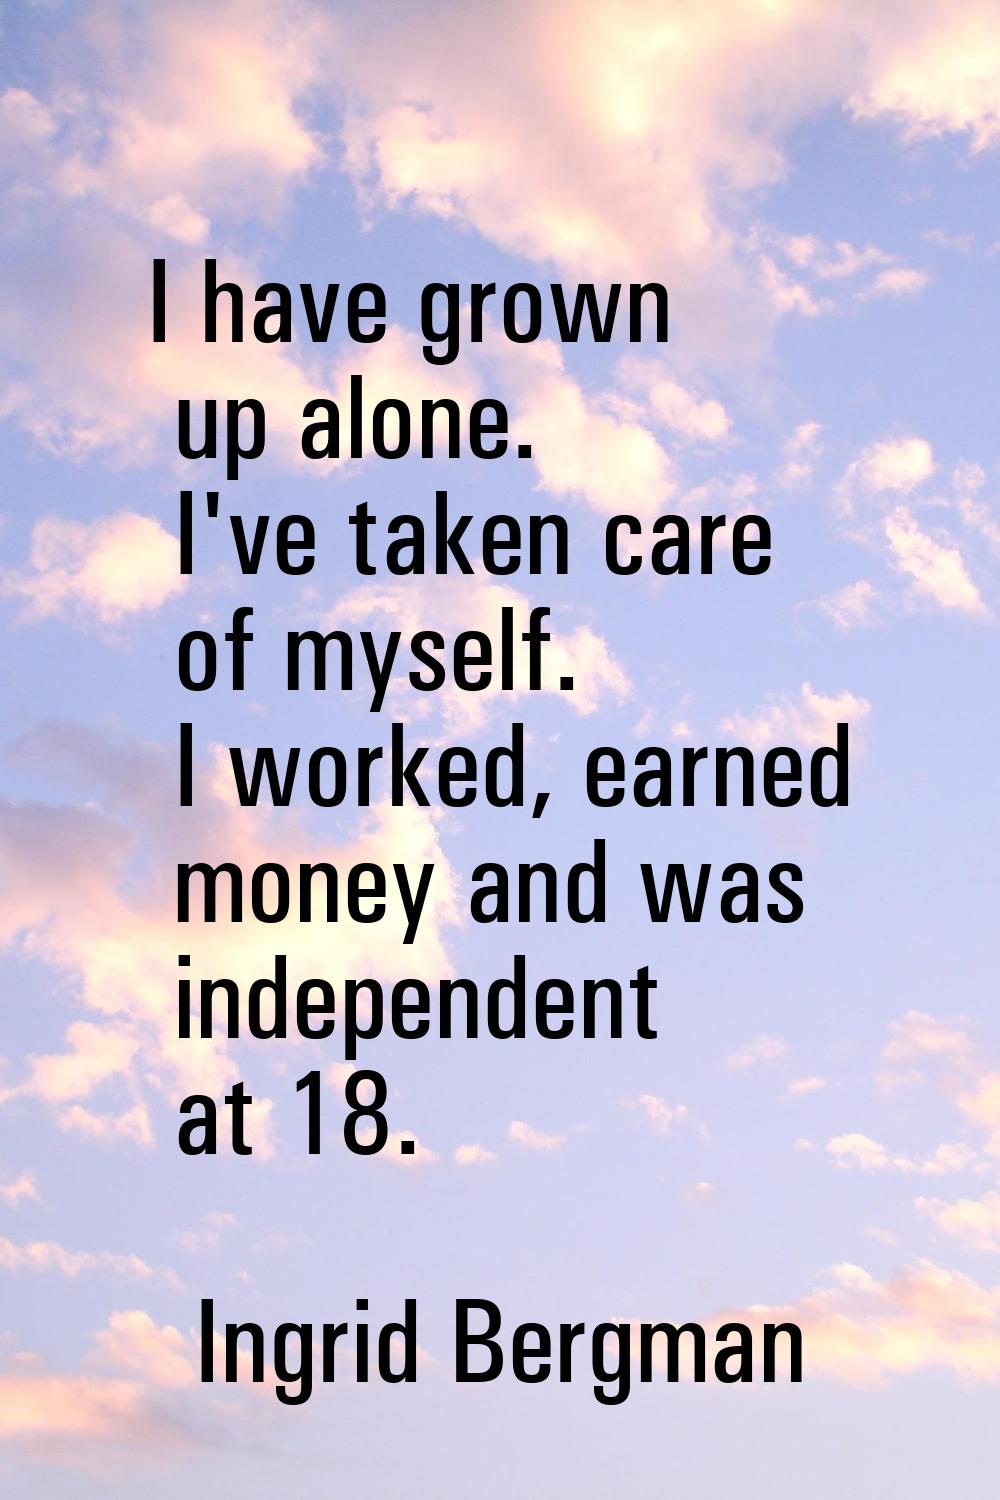 I have grown up alone. I've taken care of myself. I worked, earned money and was independent at 18.